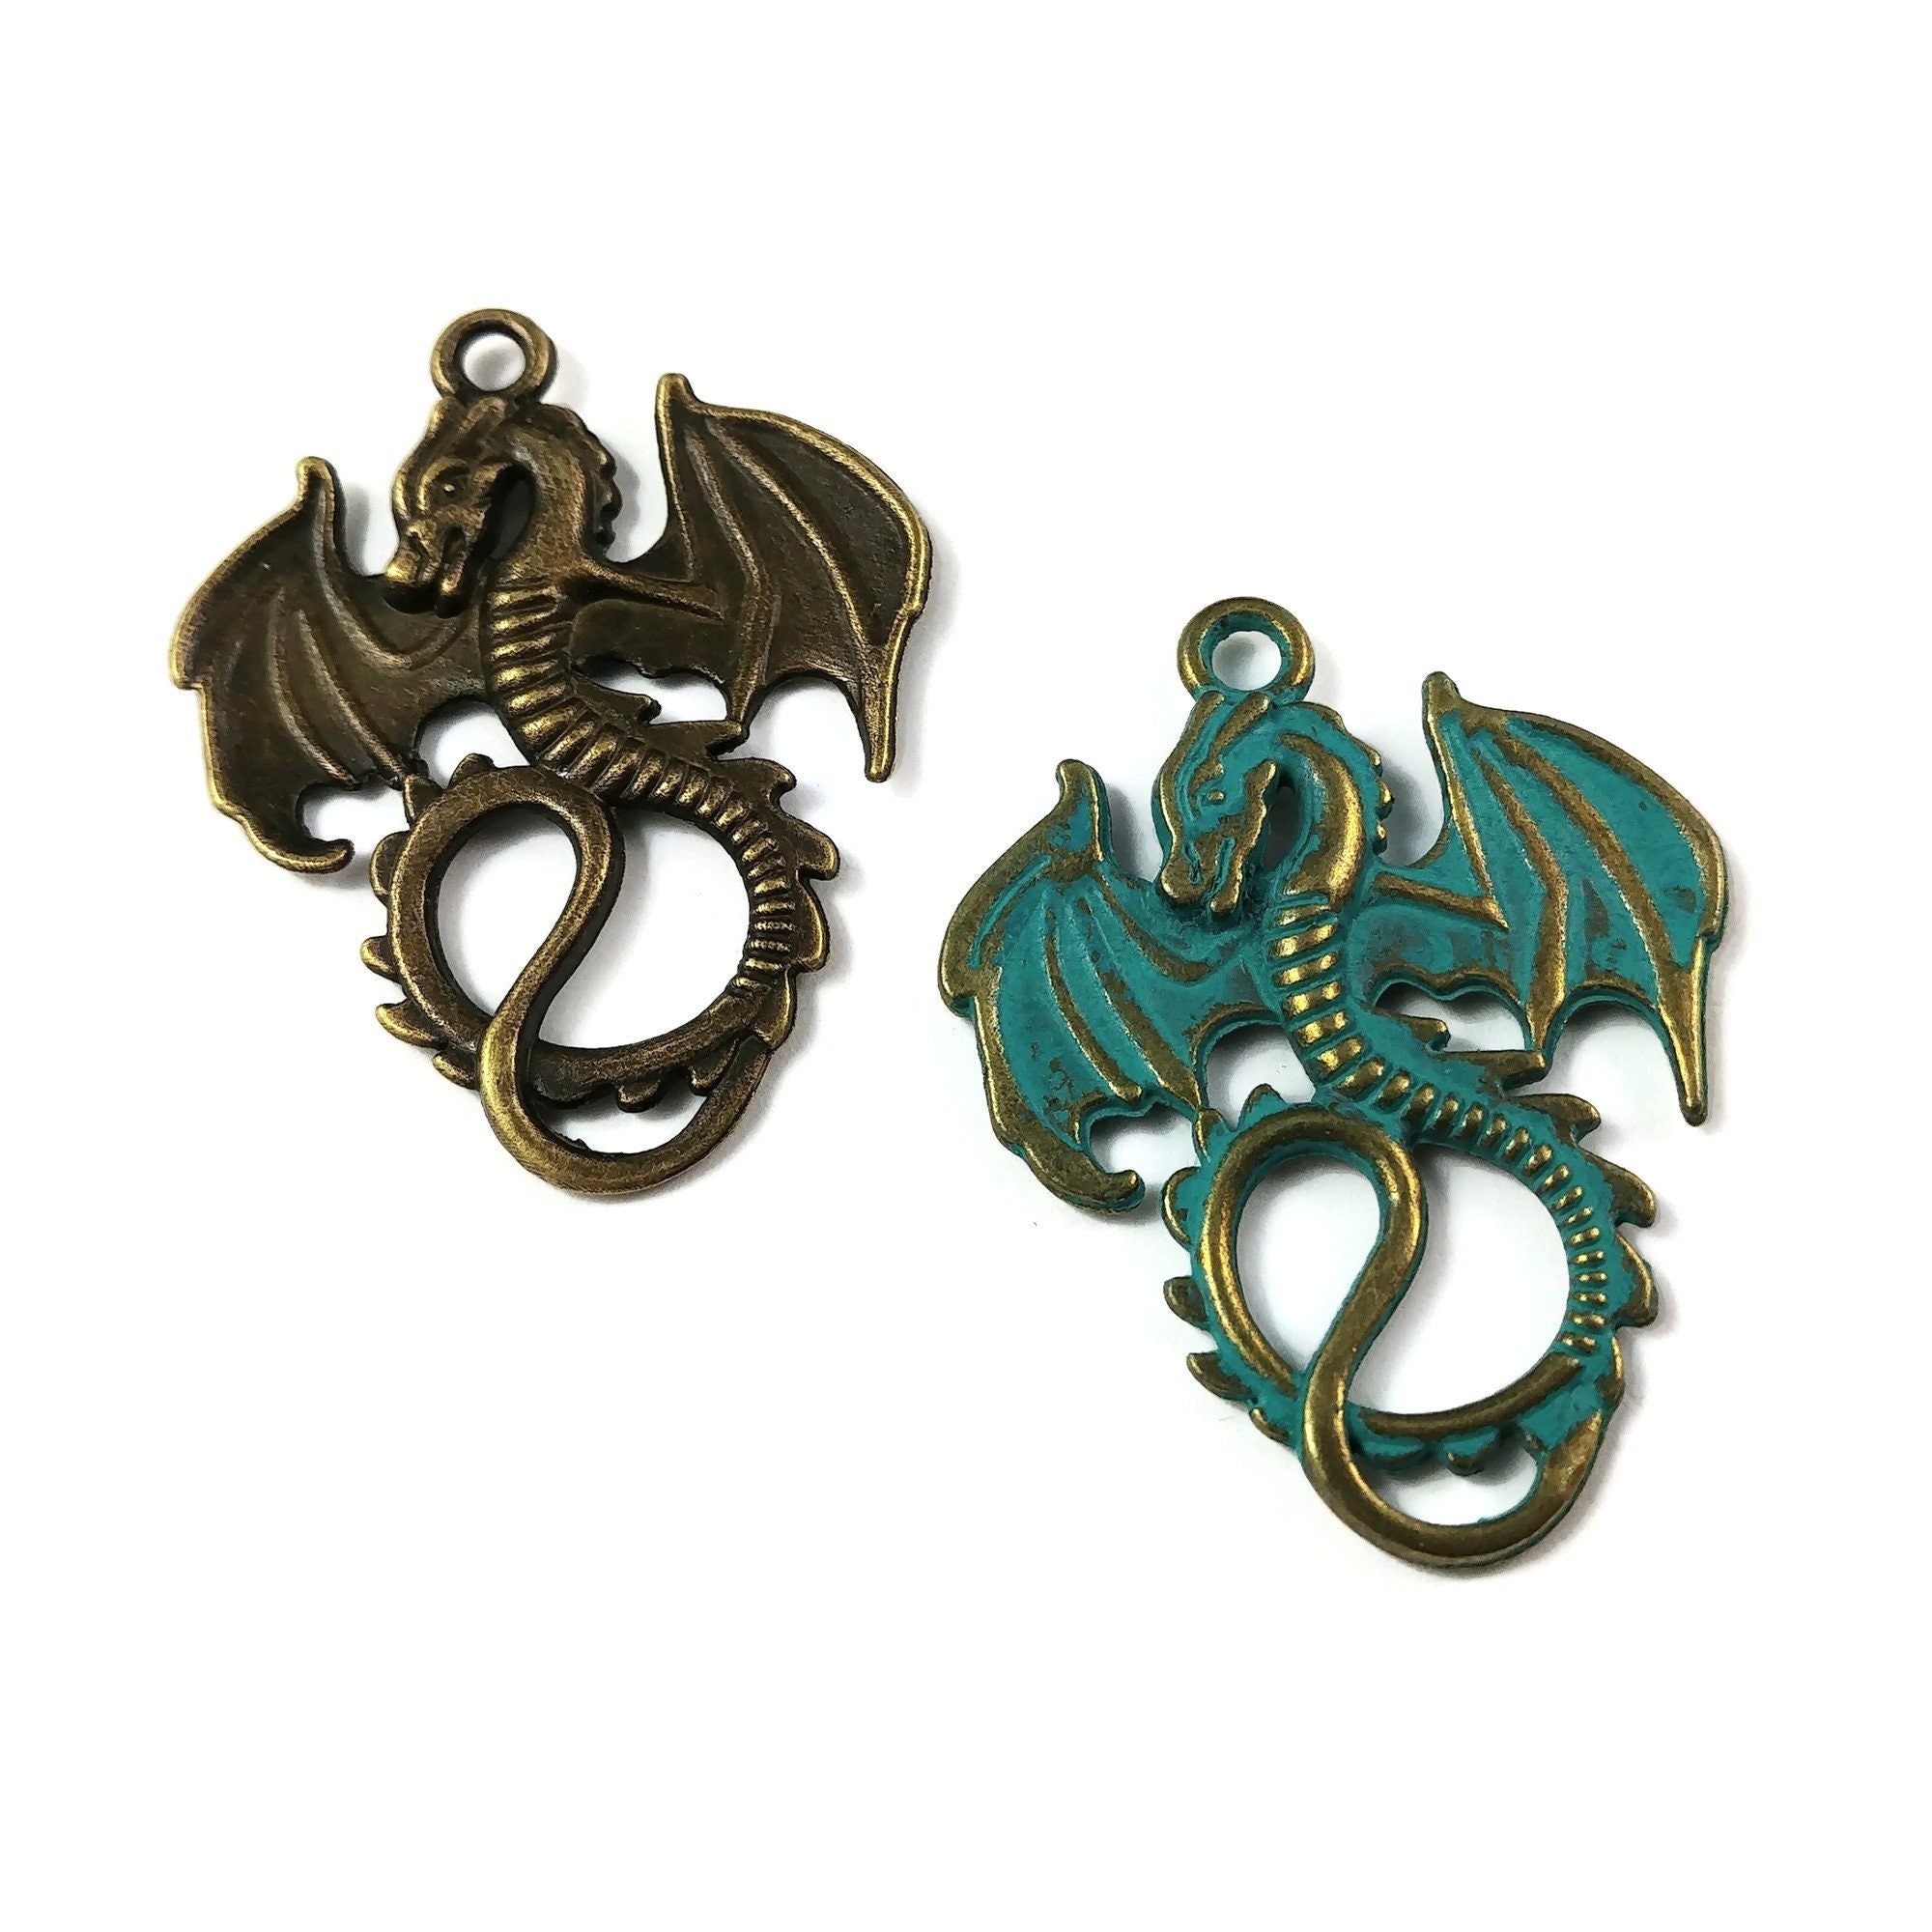 Bulk Dragon Charms in Antique Gold Pewter